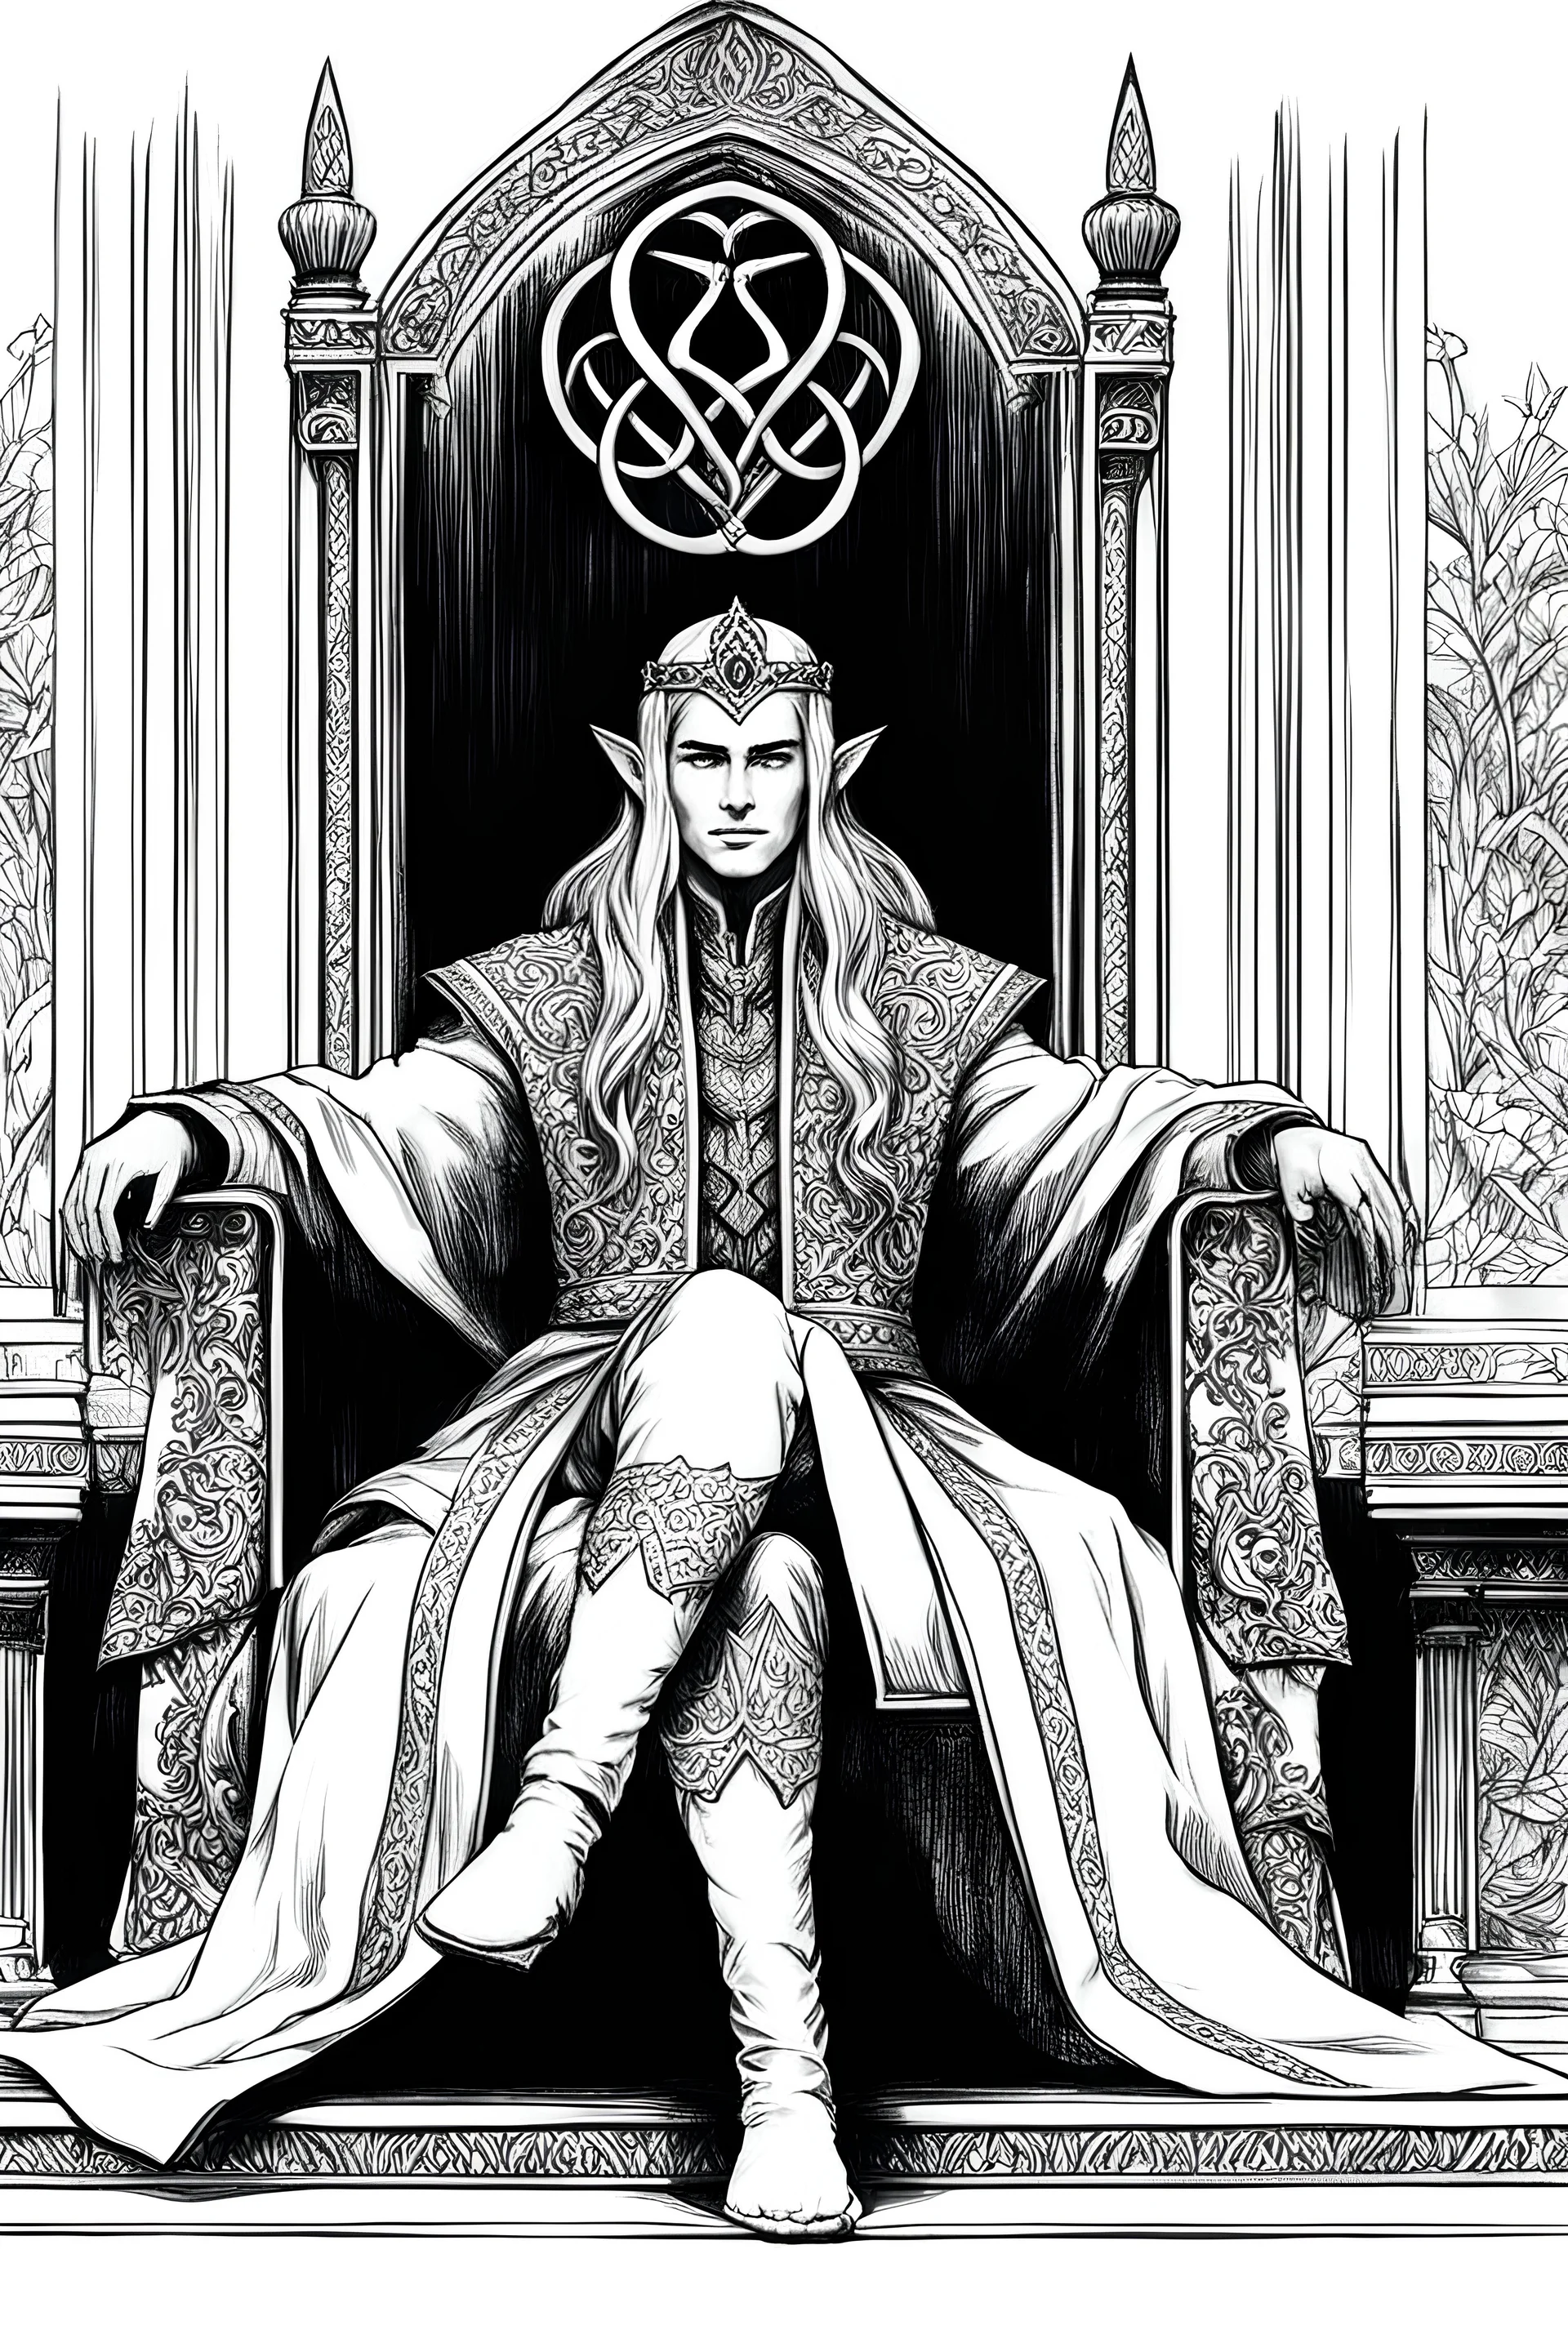 ink drawing, line art, clipart, simple line illustration, white and black, sketch style, only use outline, White background, well outline, clear, no shadows, no gray filling, no black filling, real face A 40 year elven king sits casually on a grand throne, adorned in regal robes and a splendid crown, radiating an aura of timeless wisdom and grace. Crossed legs. His relaxed posture suggests a nonchalant elegance. Behind him, an intricately carved wall displays the elven crest, with elegant torche